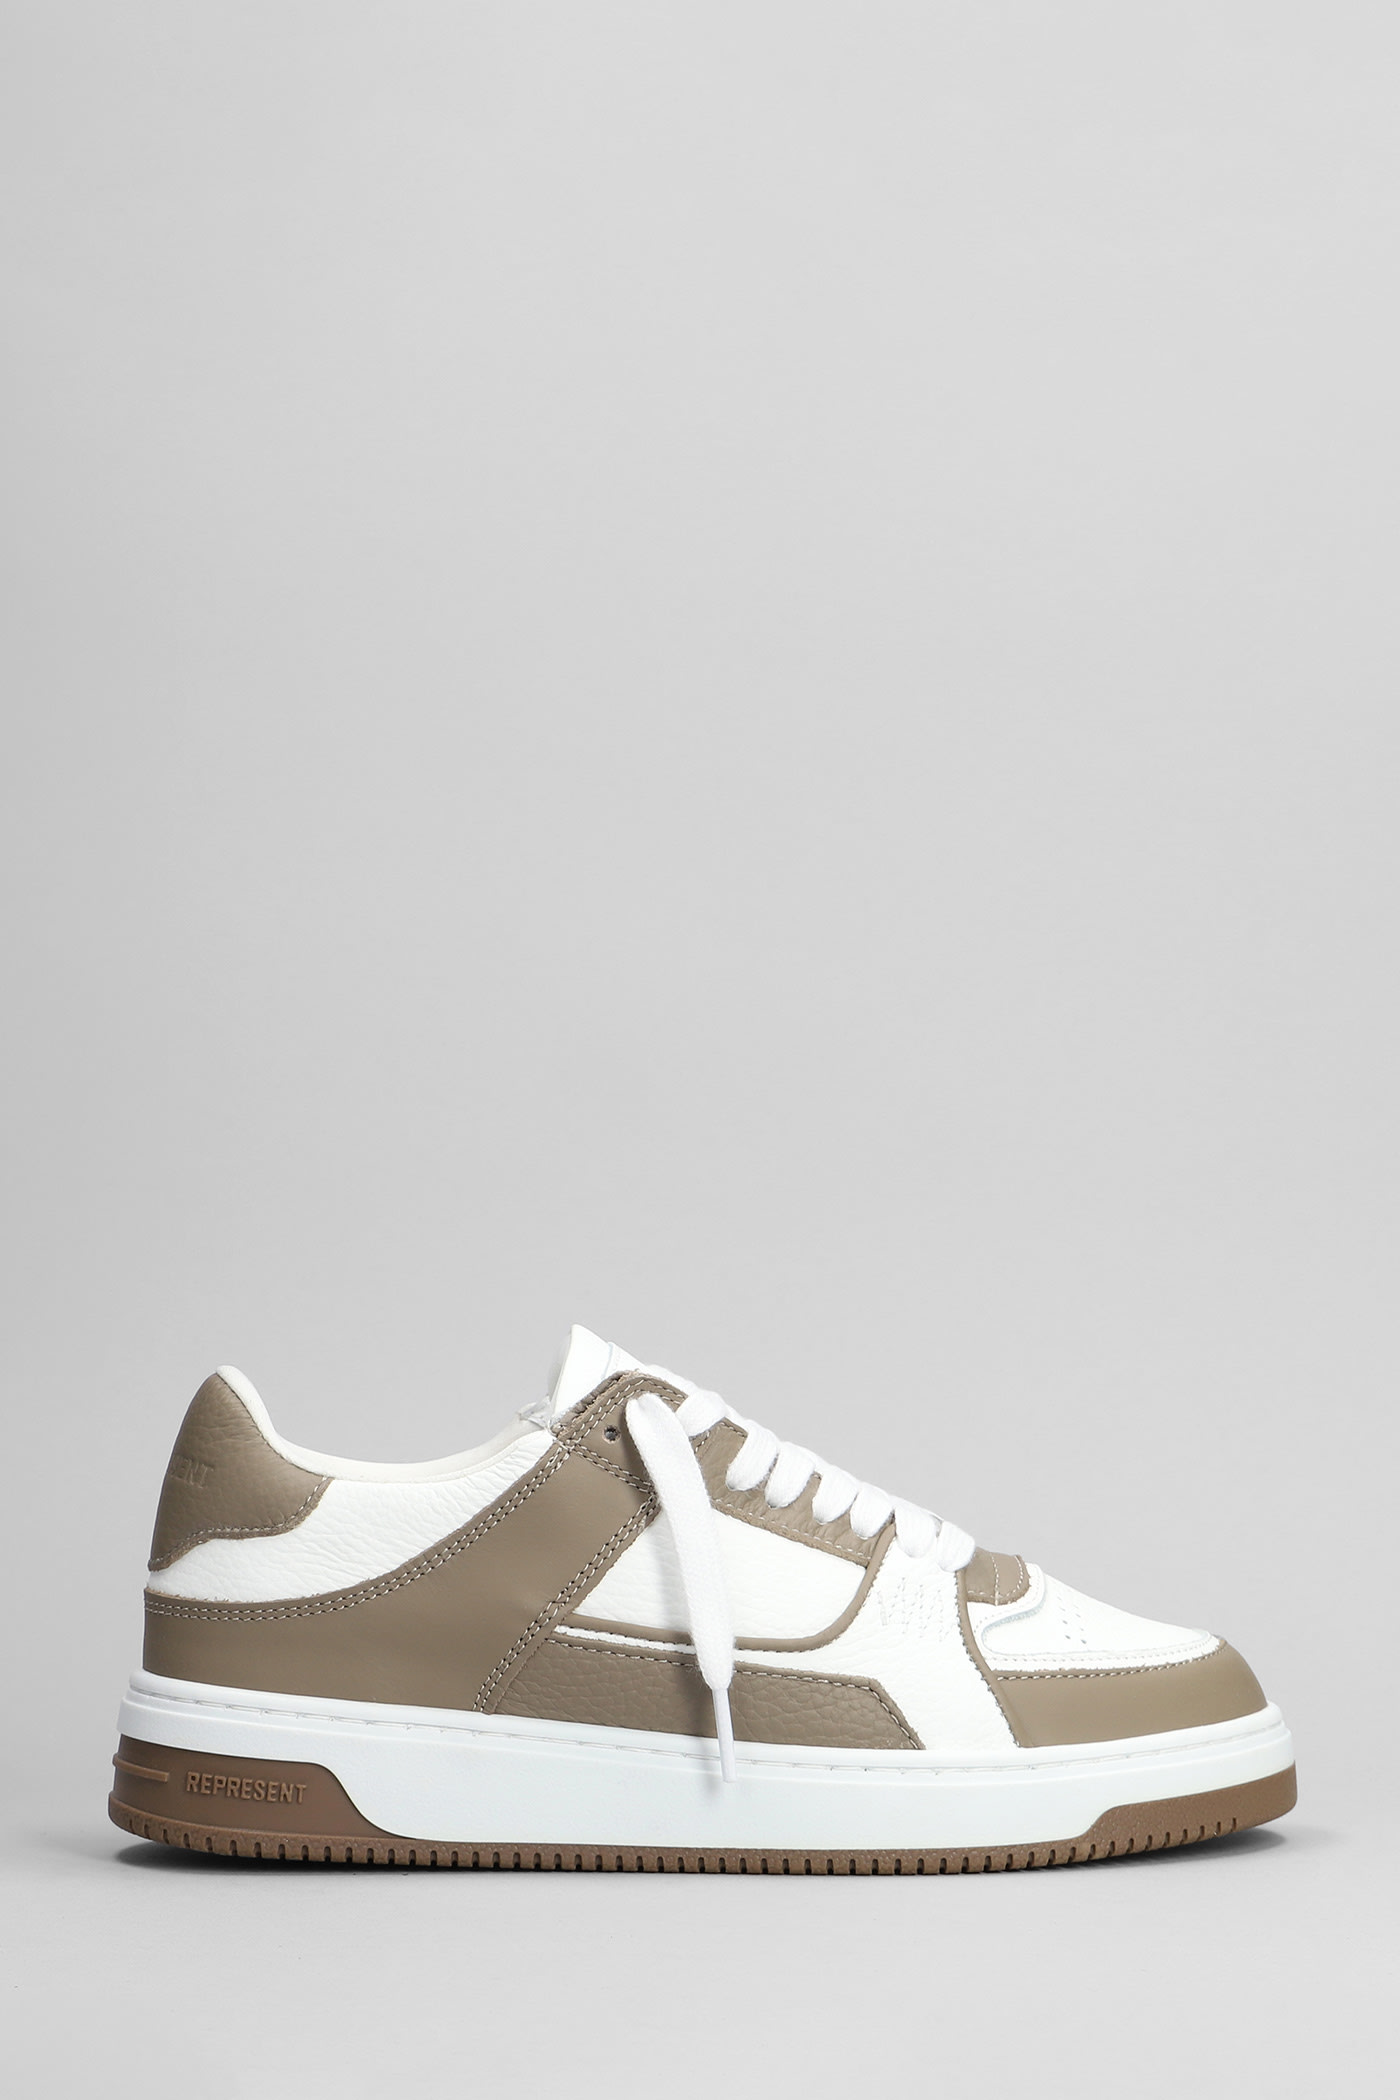 REPRESENT APEX SNEAKERS IN BEIGE LEATHER